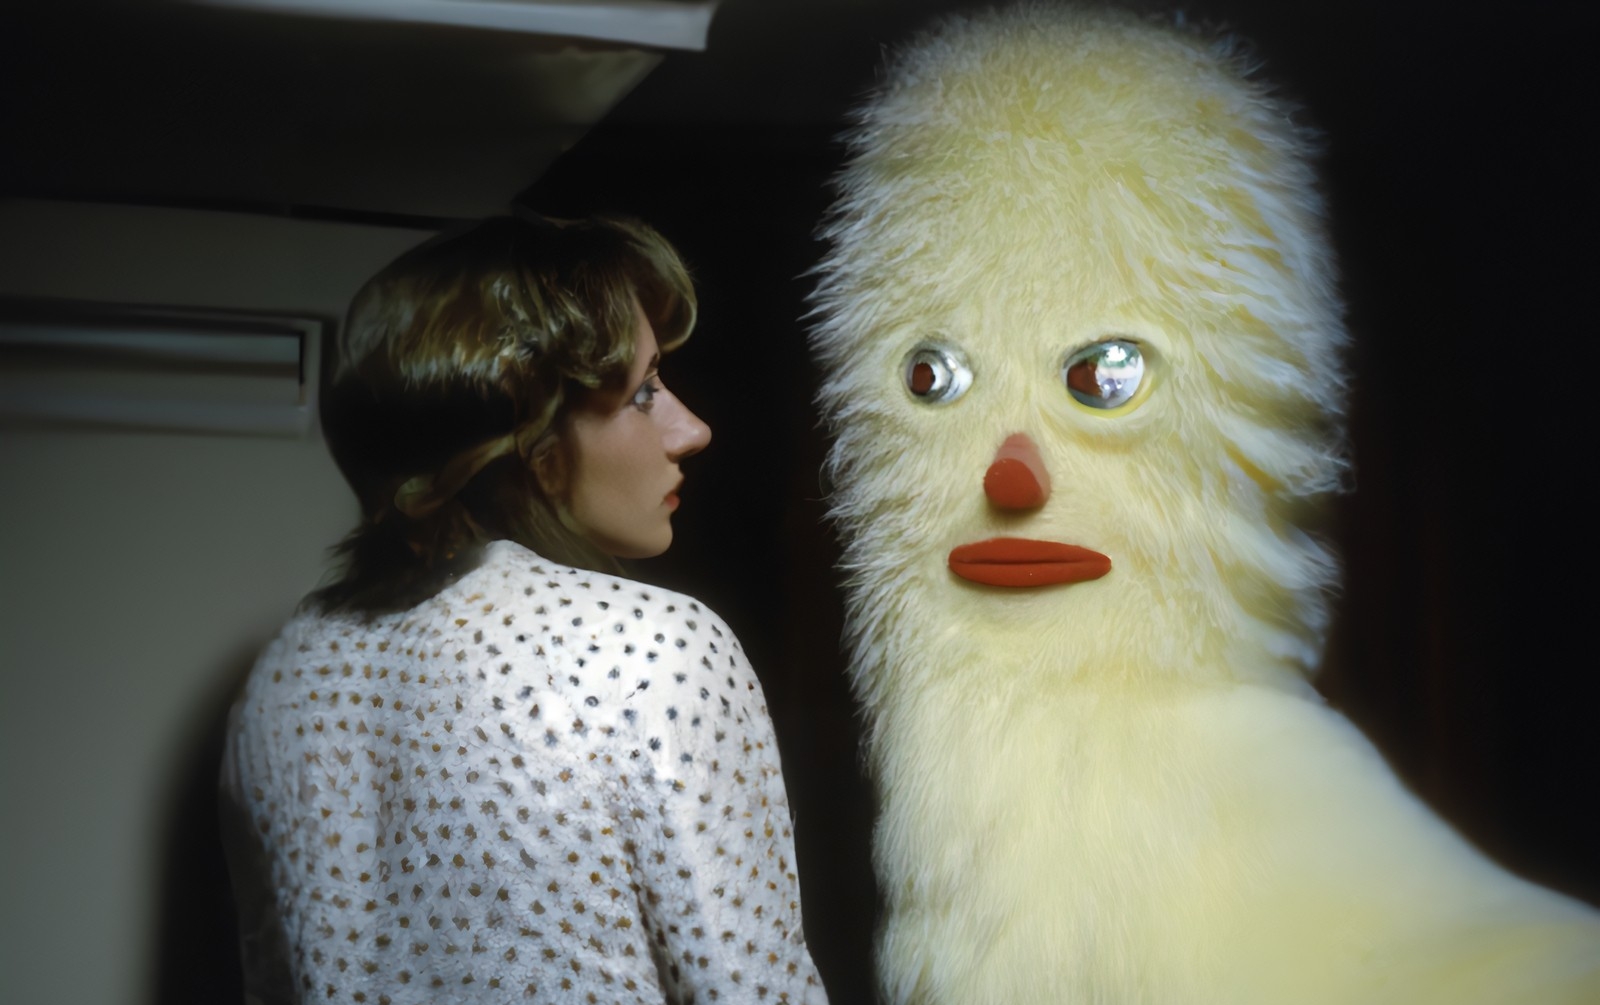 An AI-generated image of a woman with short brown hair looking at a life-size fluffy yellow figure that has big eyes, a red nose and red mouth